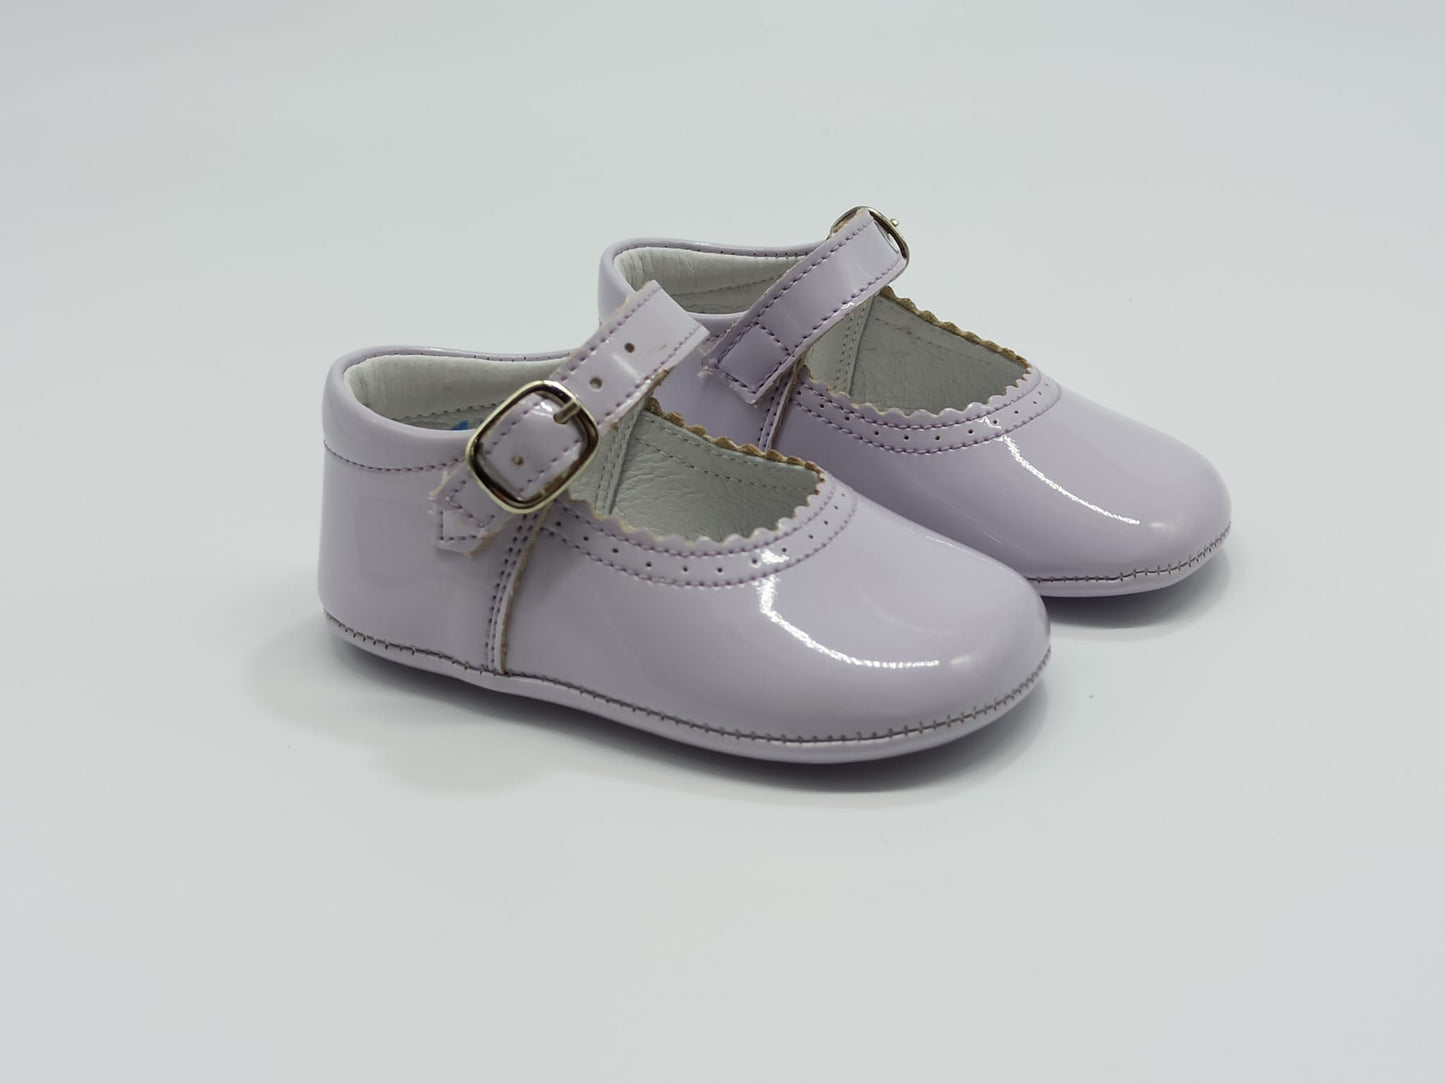 712 Lilac Soft Baby Shoe